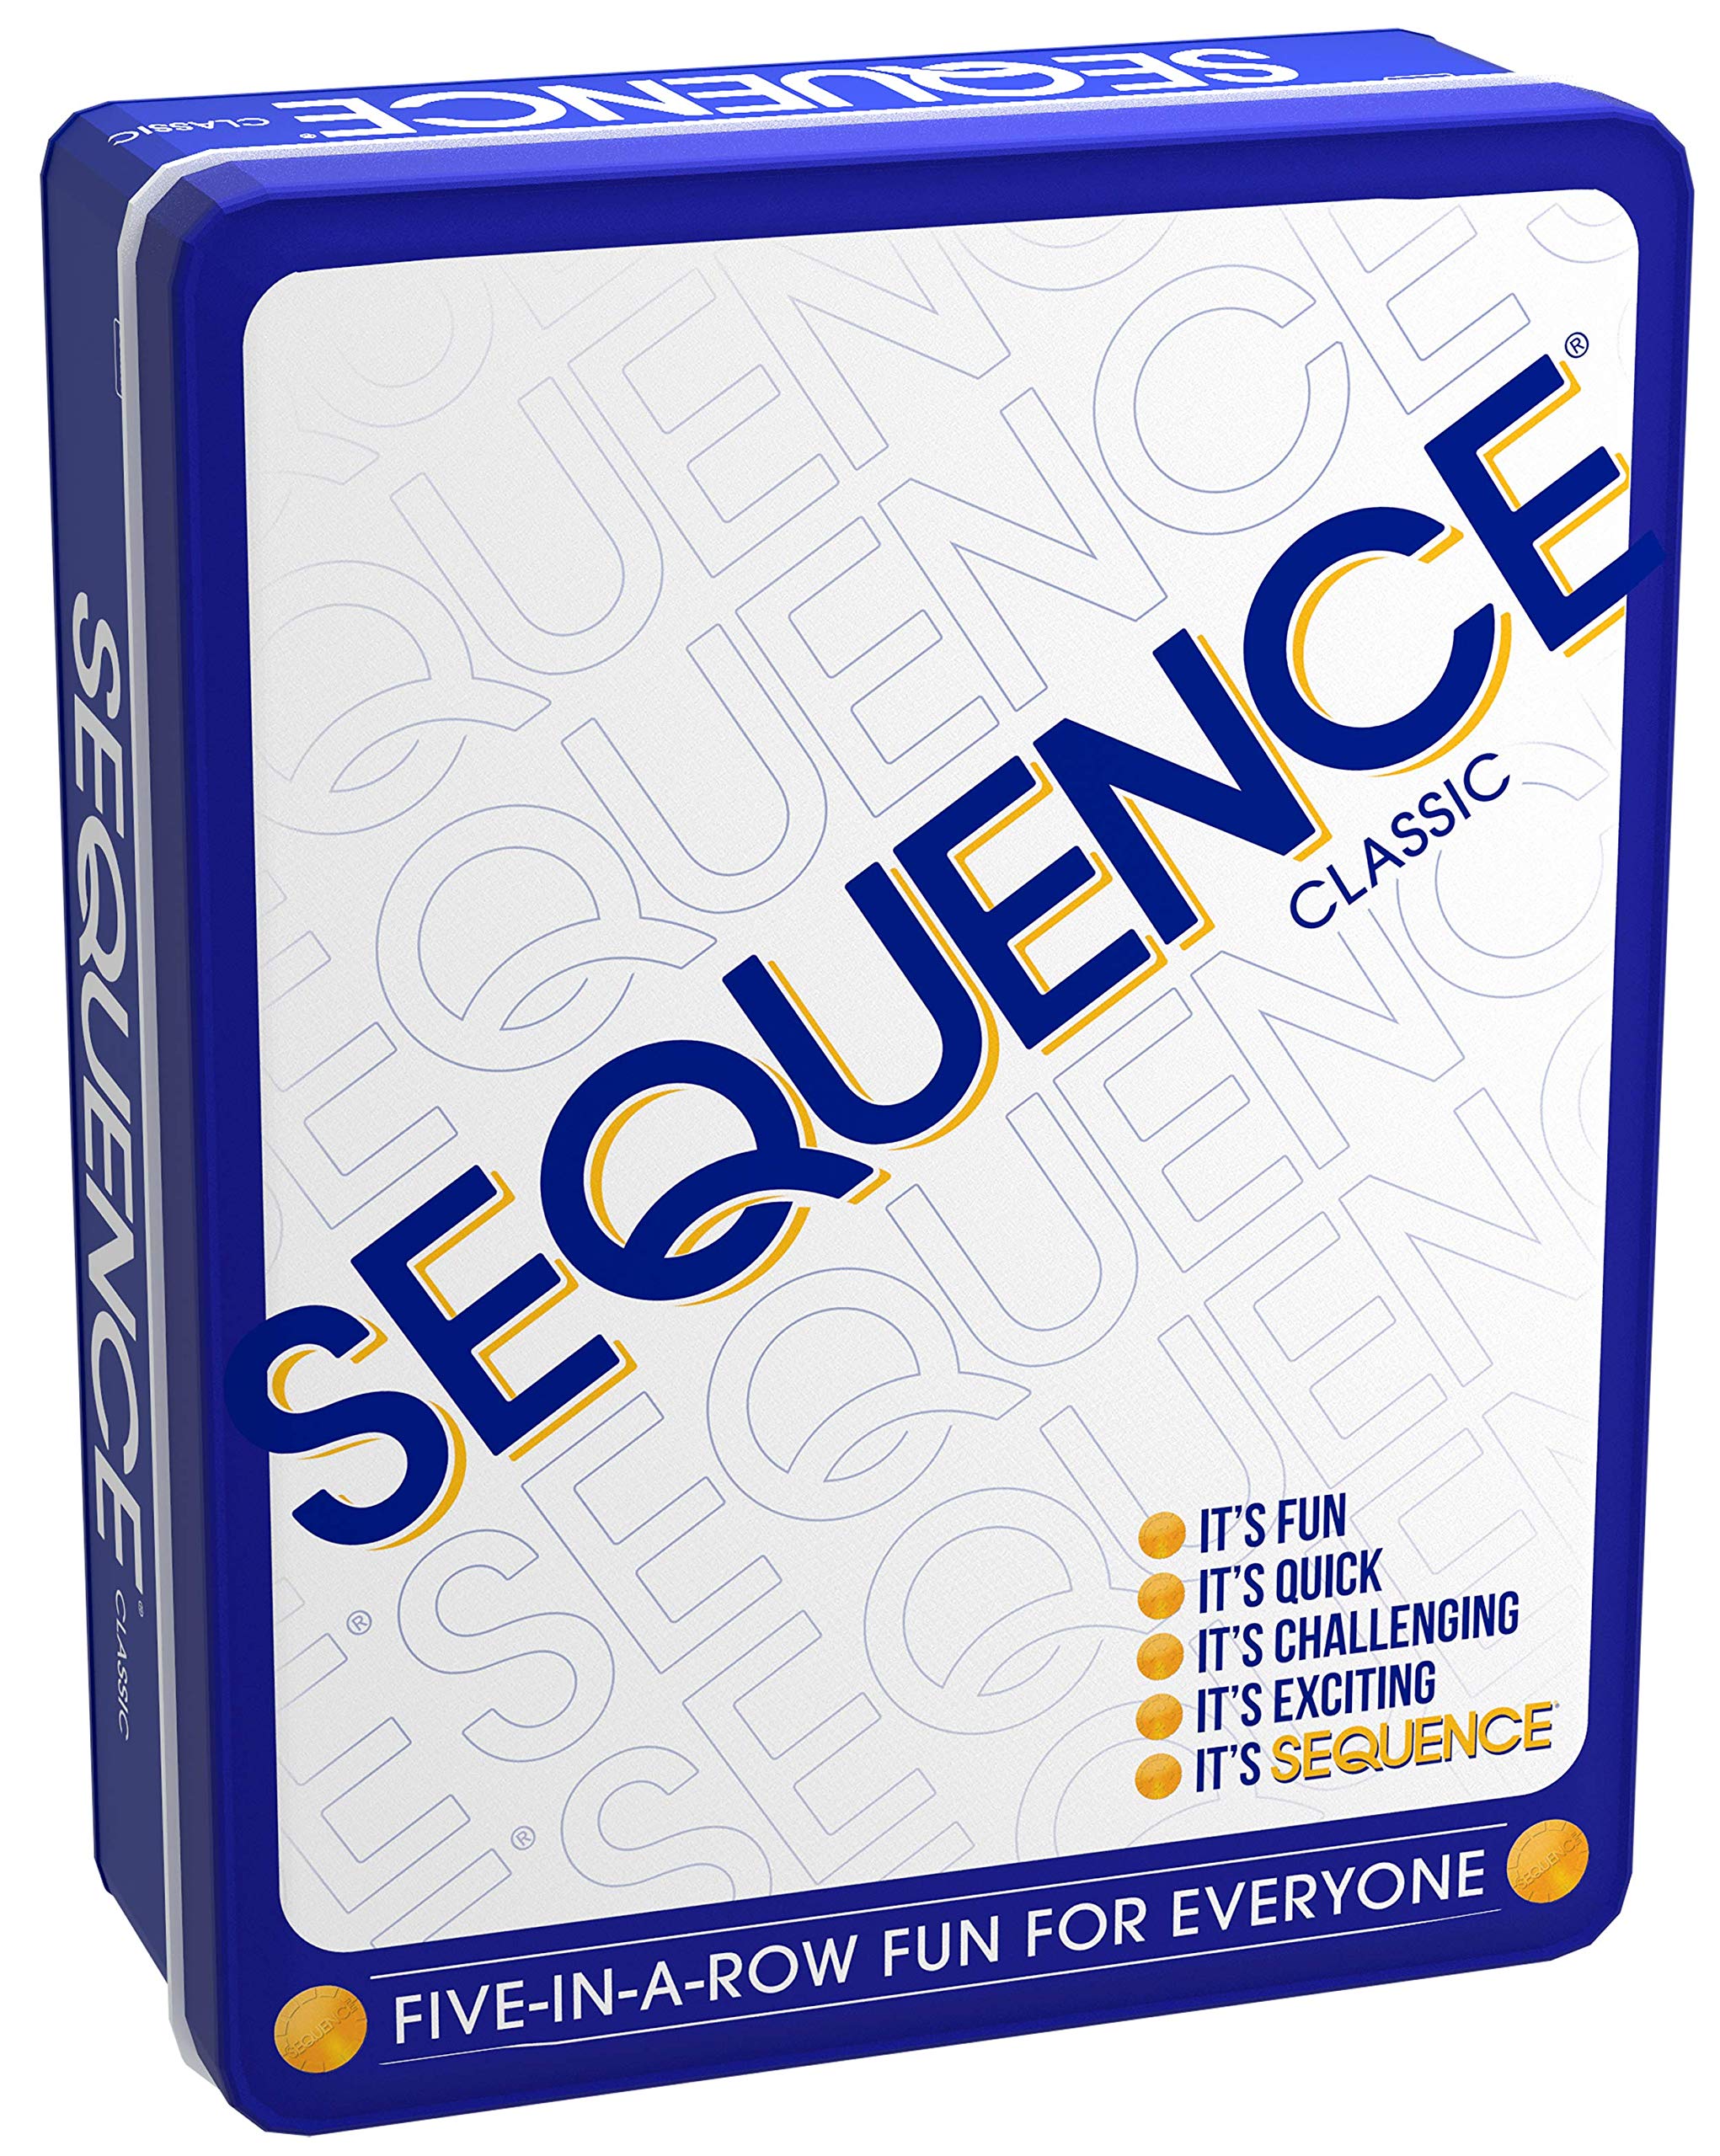 Sequence in a Tin - Five-in-a-Row Fun for Everyone by Jax, White